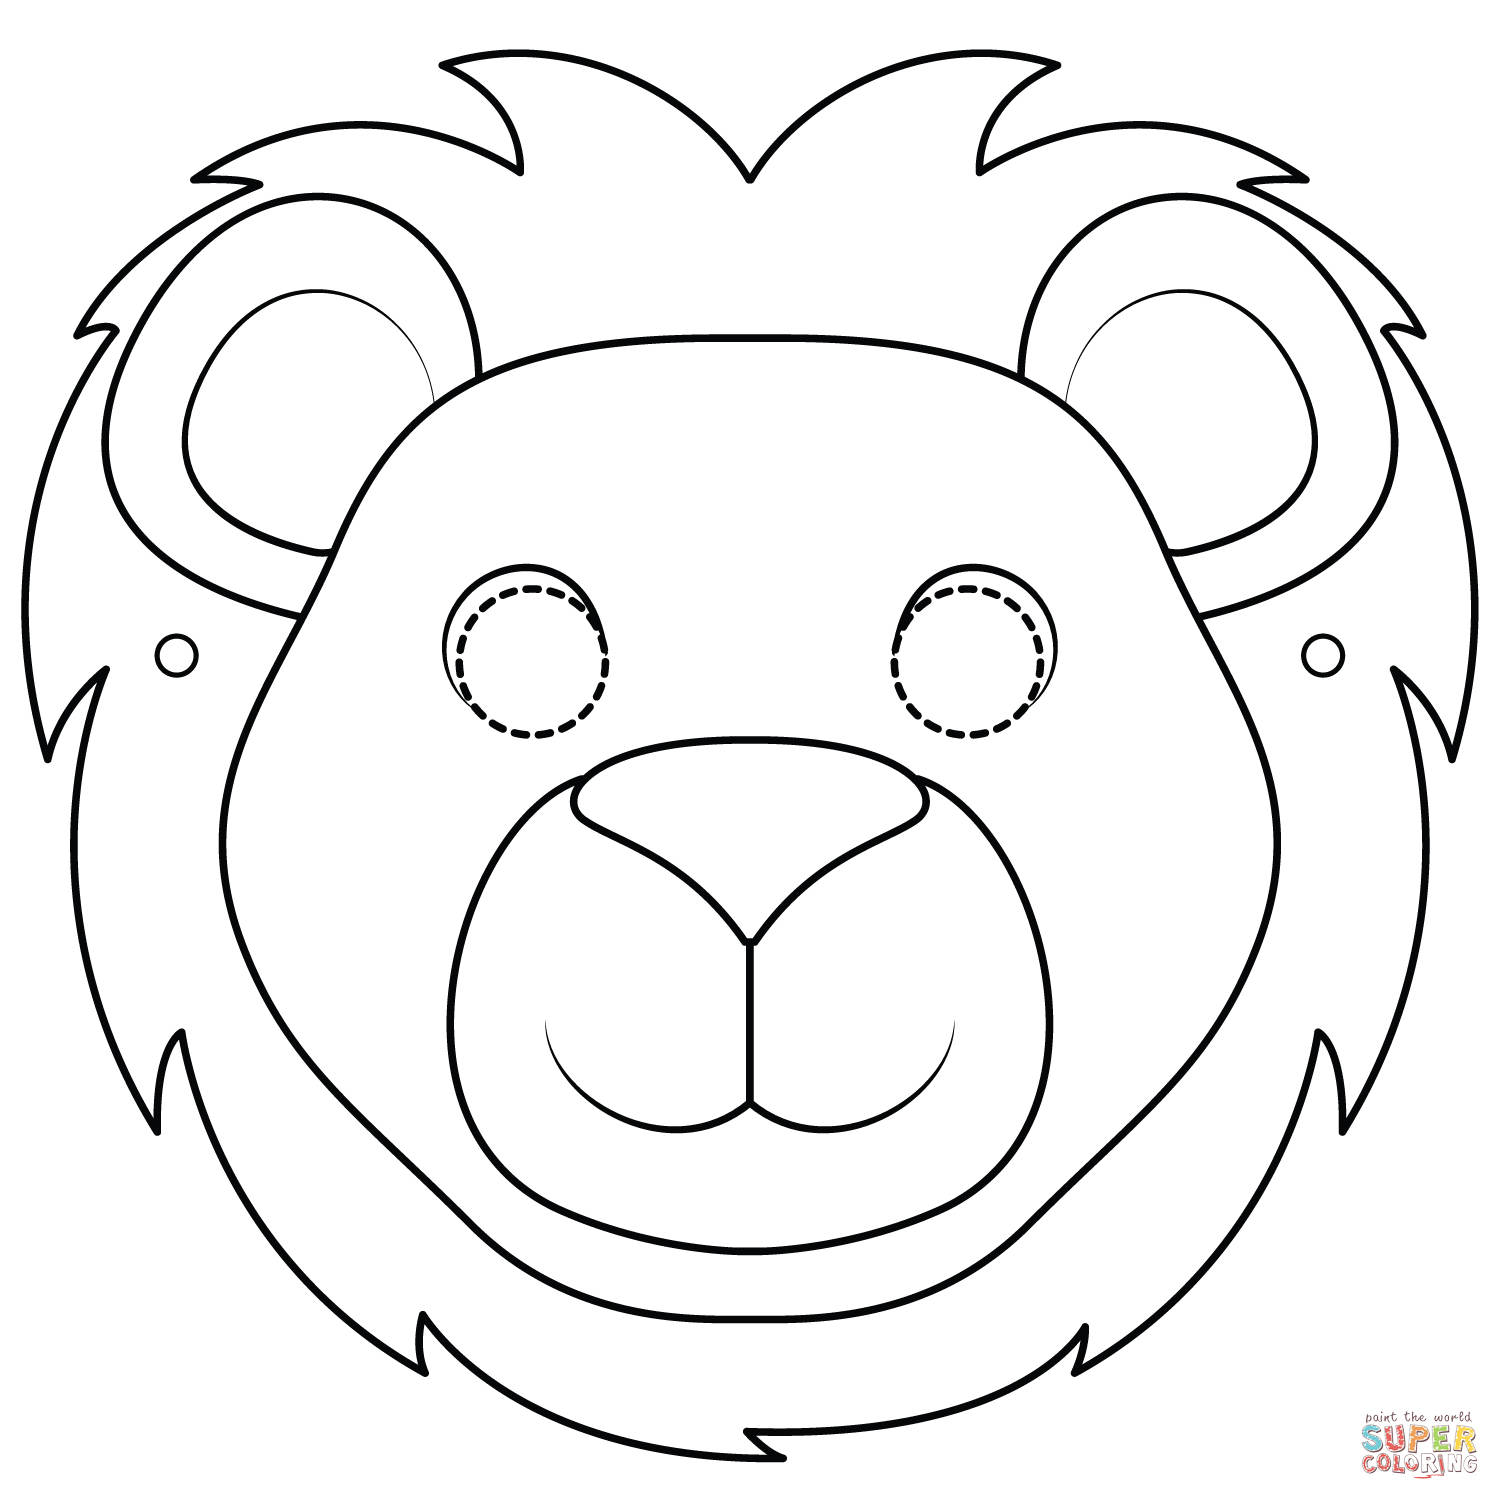 Lion Mask Coloring Page | Free Printable Coloring Pages - Free Printable Lion Mask